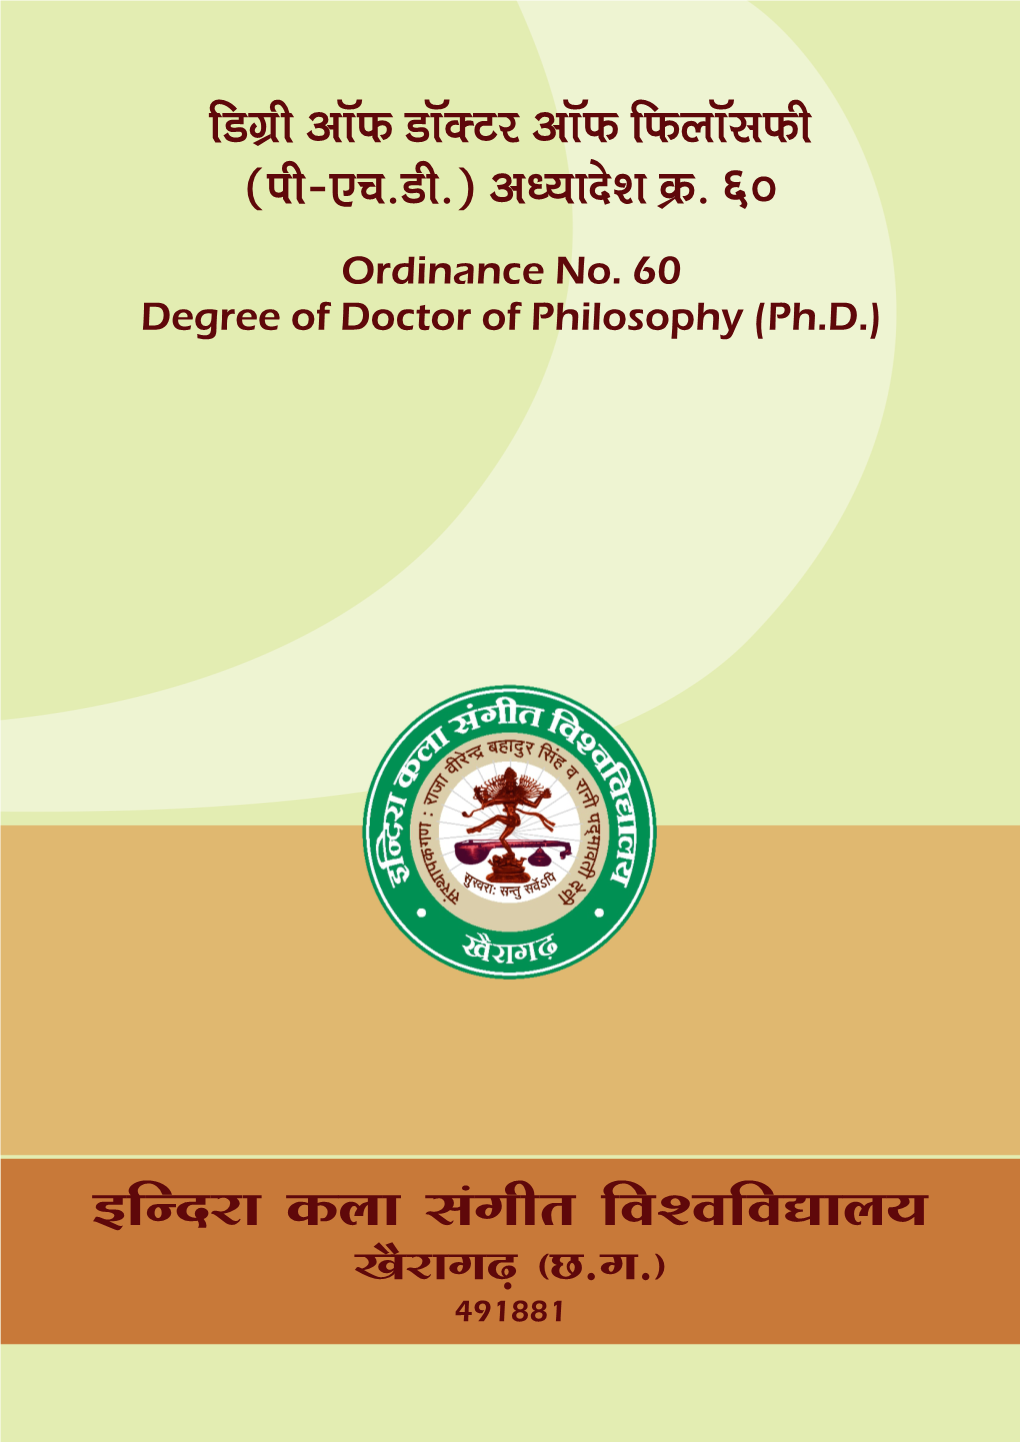 Ordinance No. 60 Degree of Doctor of Philosophy (Ph.D.)